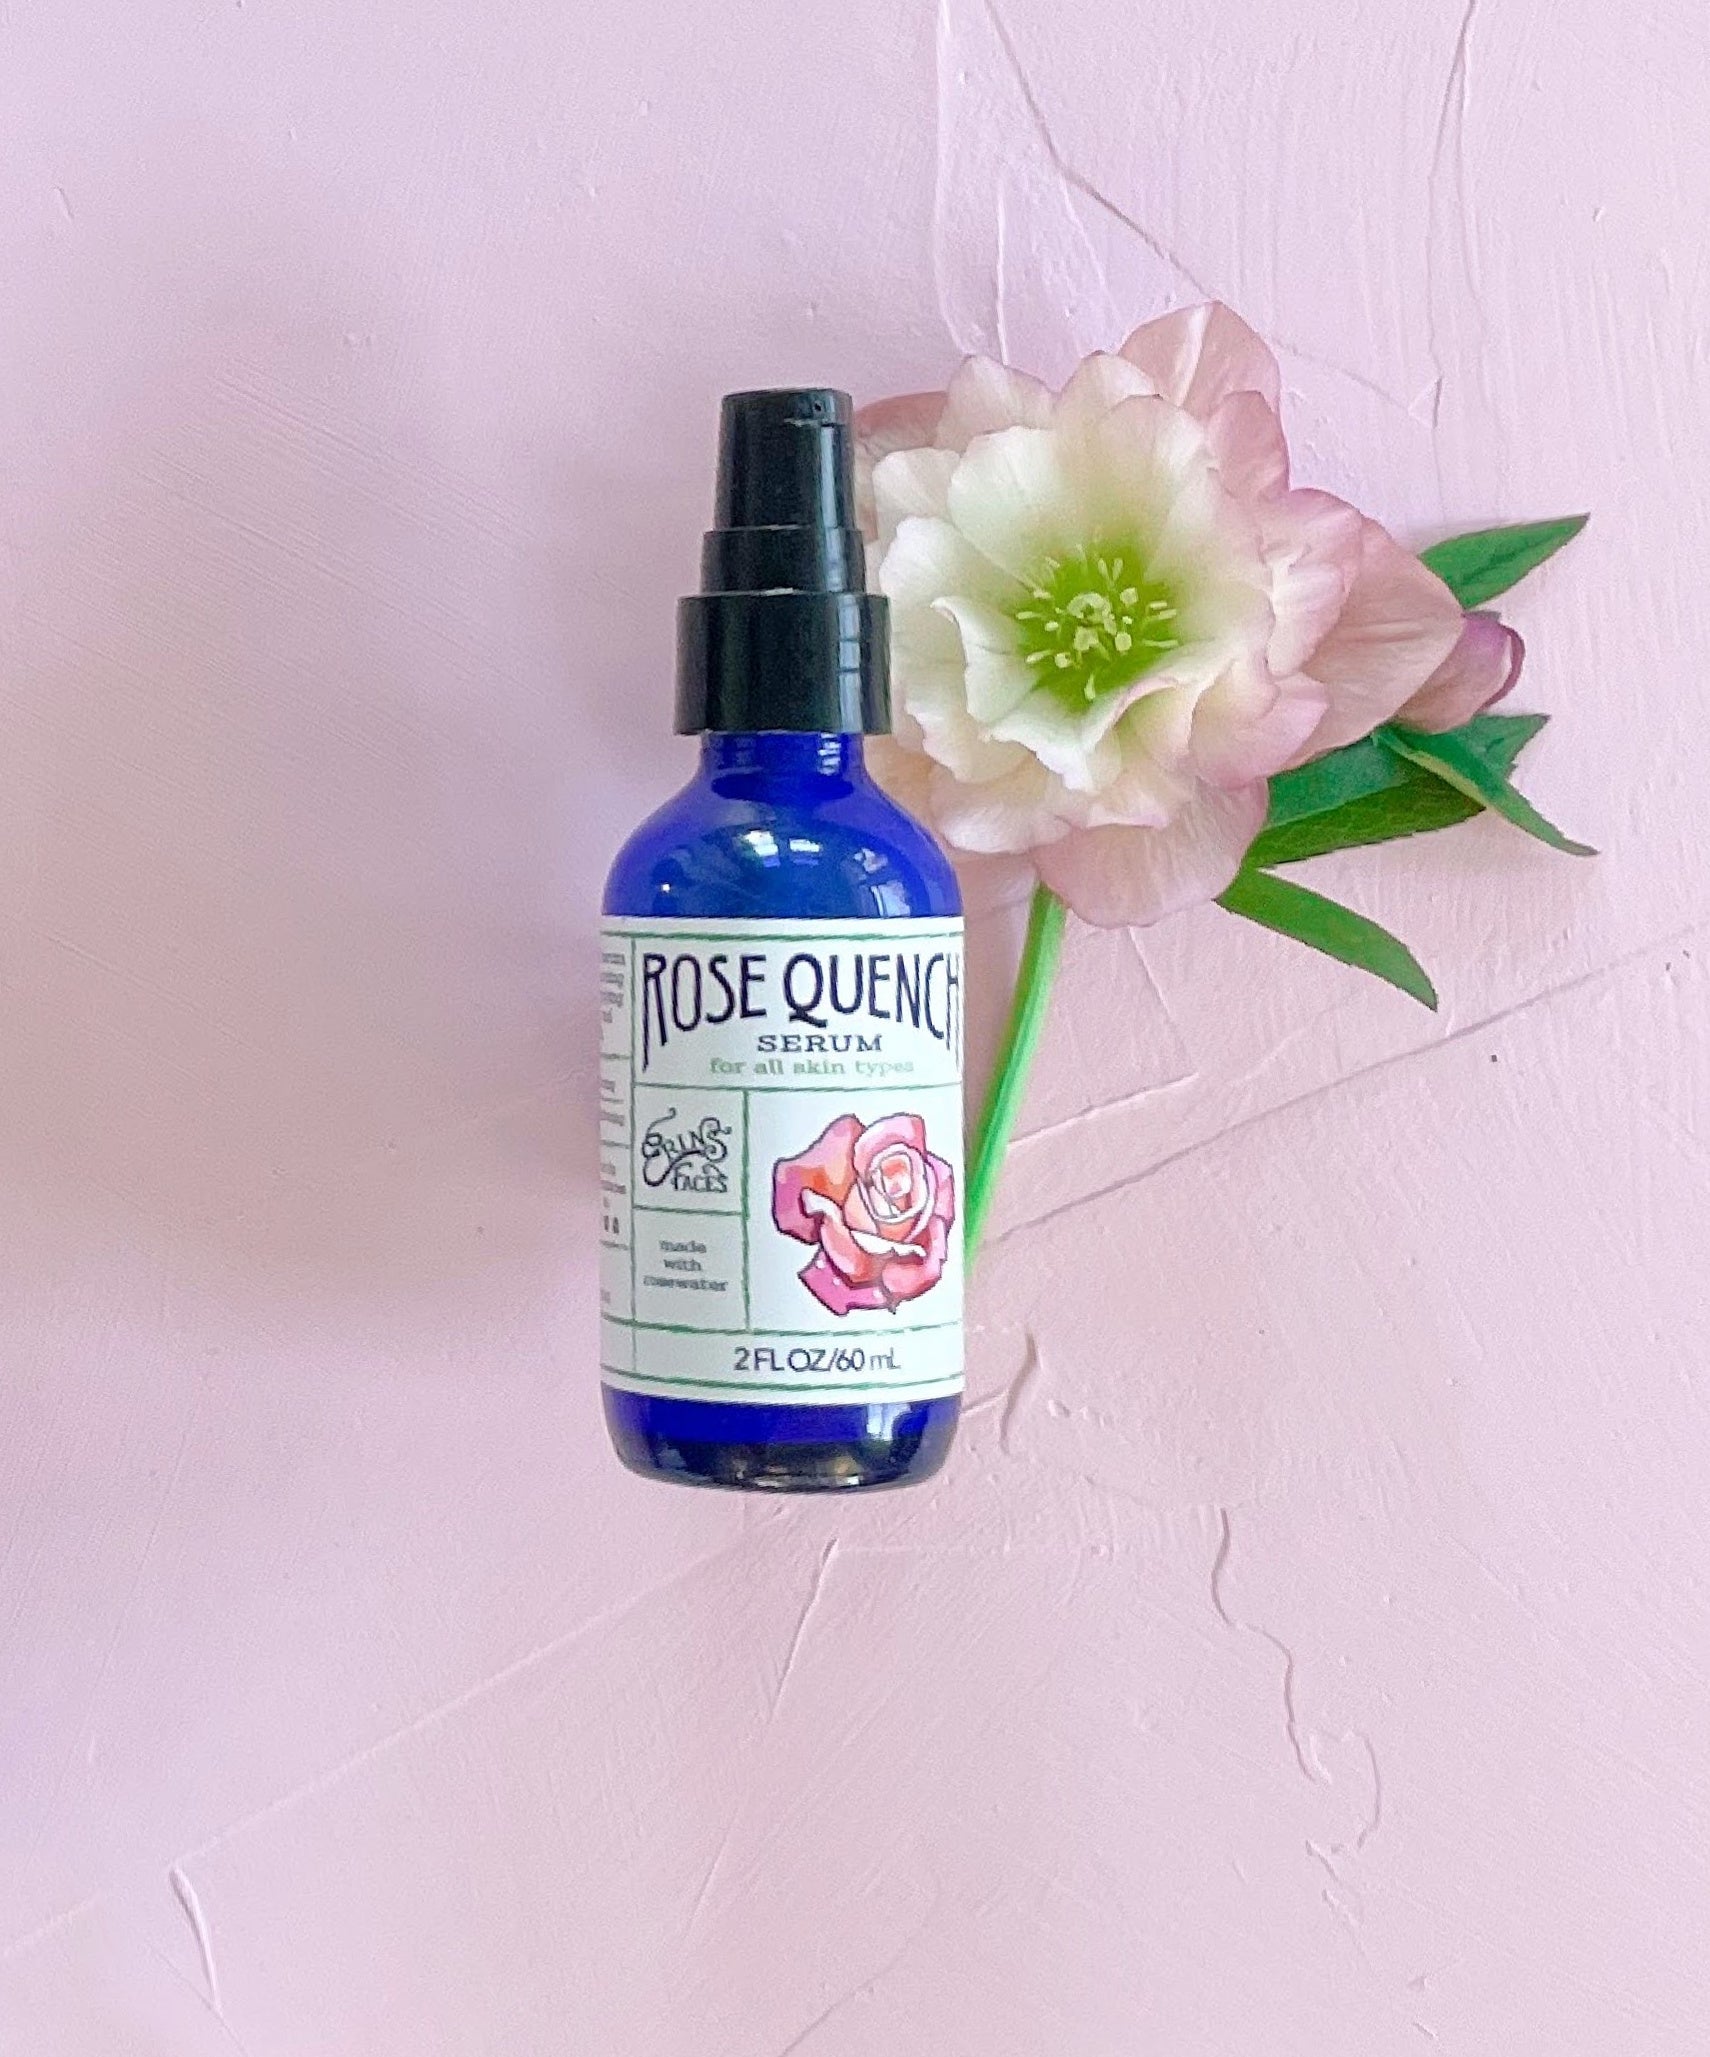 rose quench serum from erin's faces bottle next to white and pink hellebore on pink background